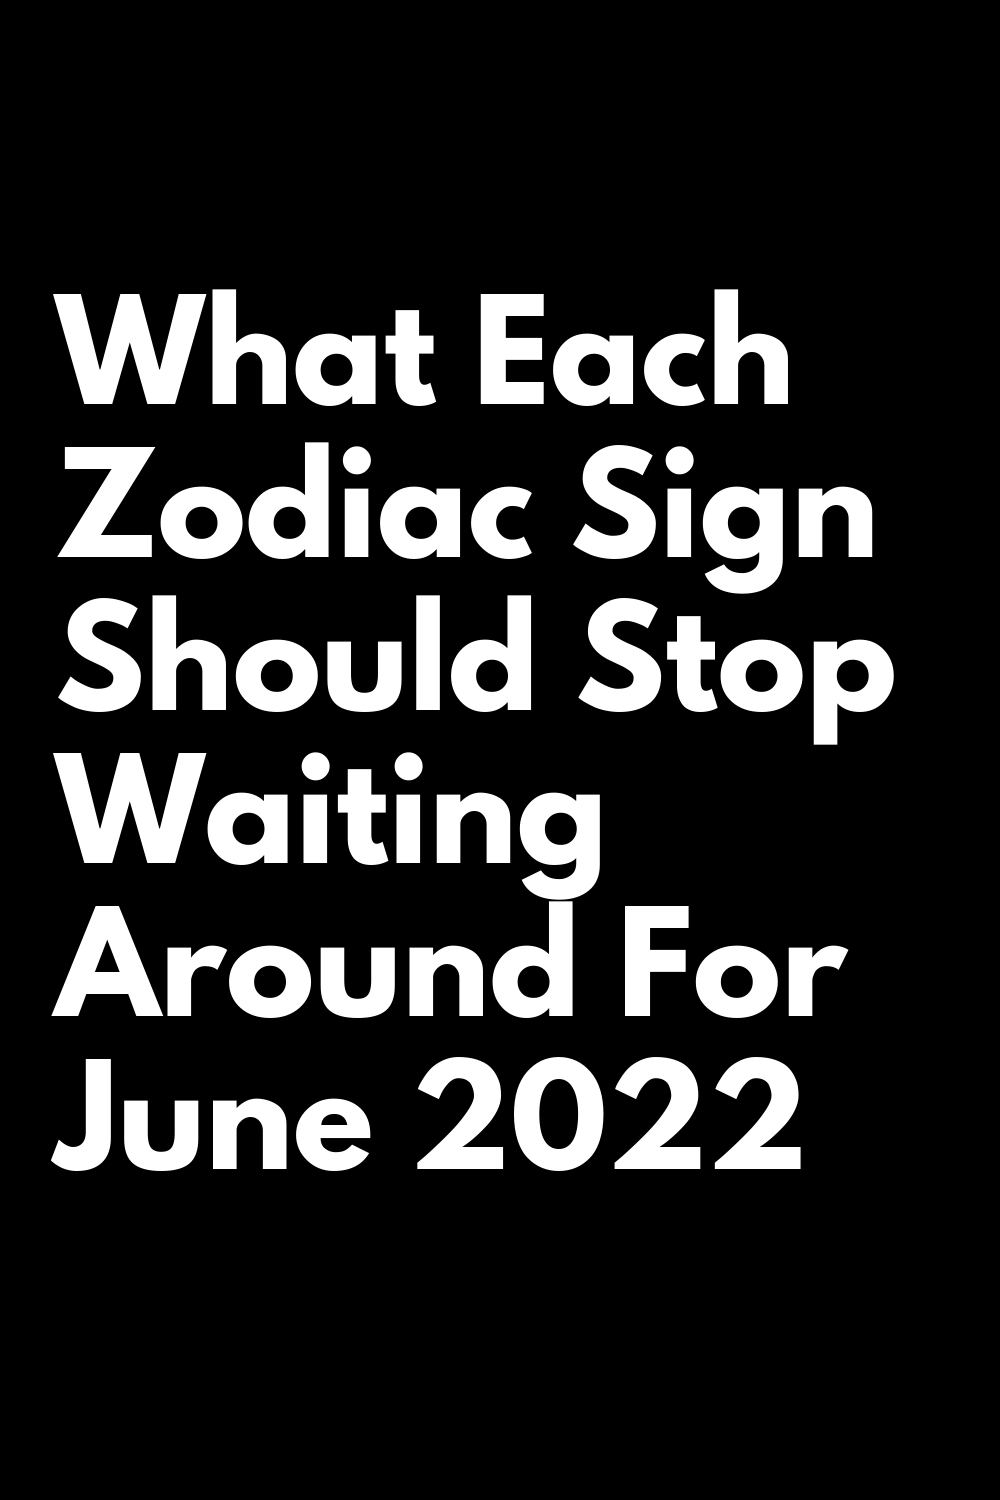 What Each Zodiac Sign Should Stop Waiting Around For June 2022 - Zodiac ...